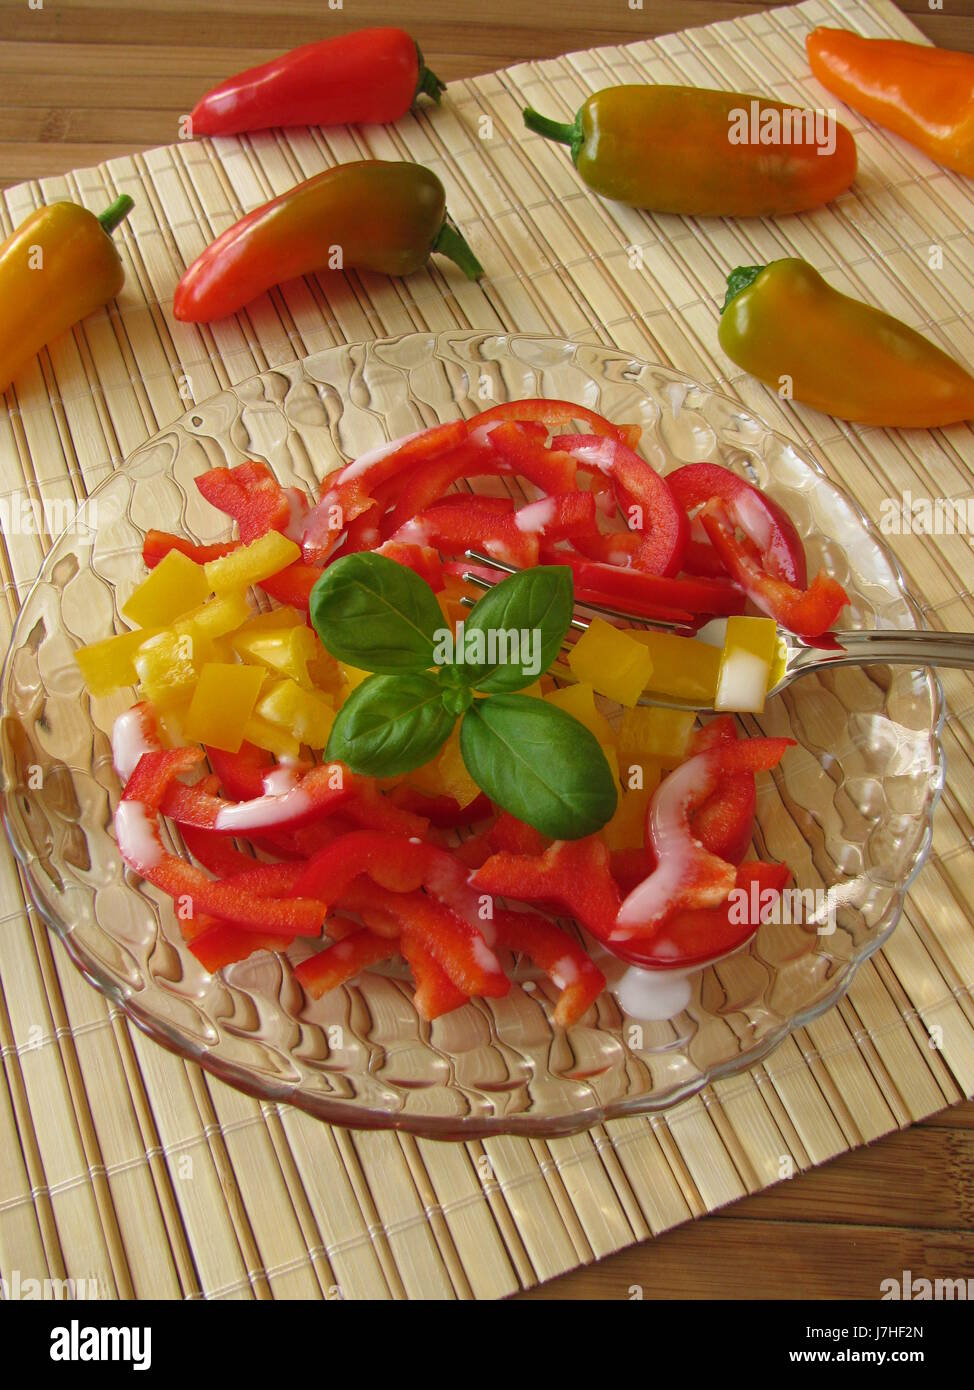 raw food salad with peppers Stock Photo